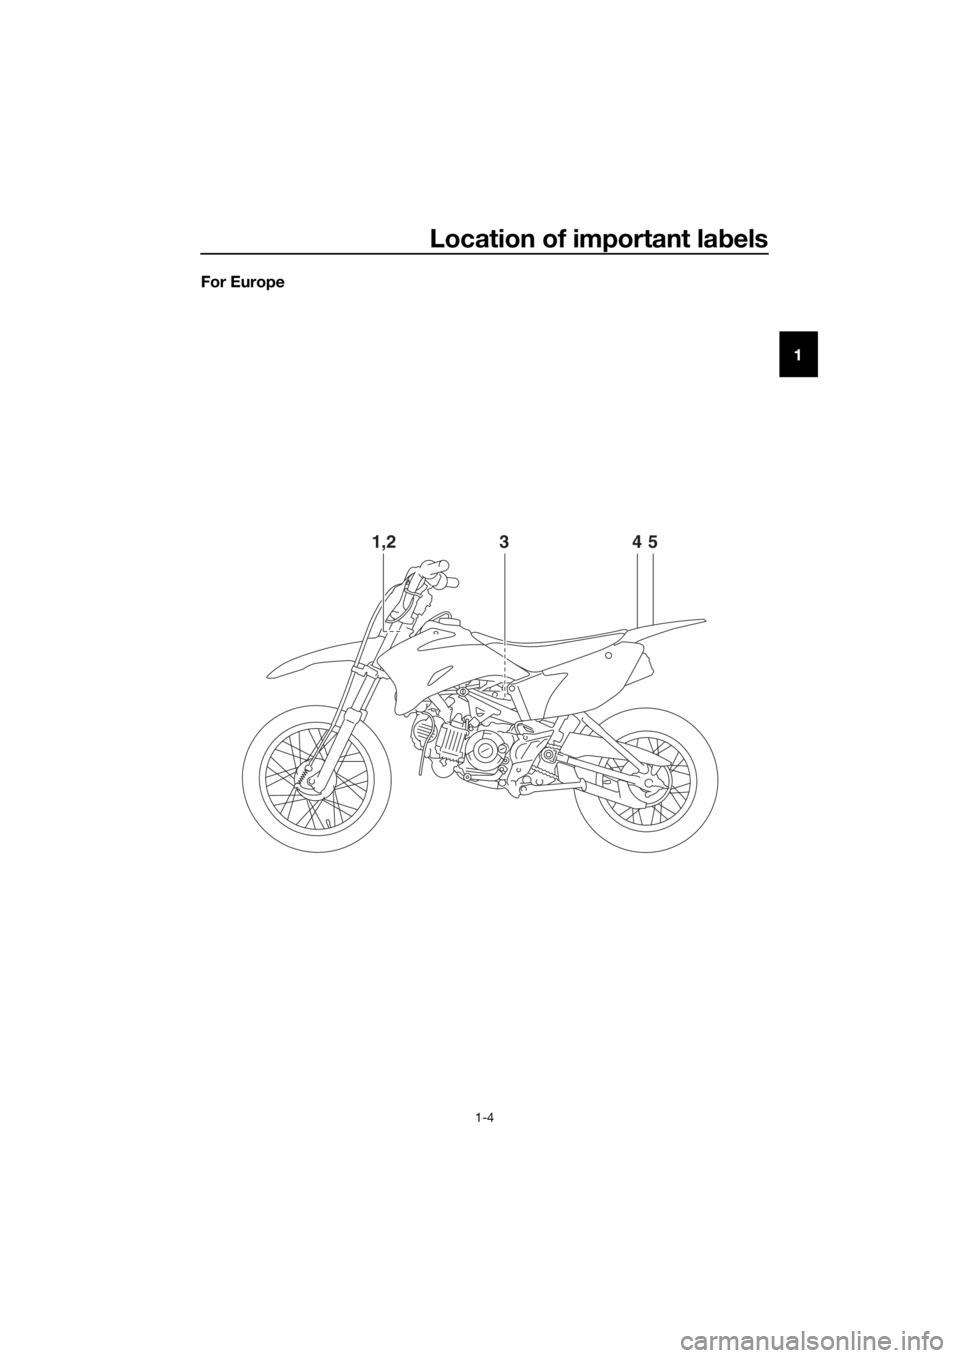 YAMAHA TT-R110E 2018 User Guide Location of important labels
1-4
1
For Europe
4
1,253
UB5183E0.book  Page 4  Friday, June 9, 2017  8:32 AM 